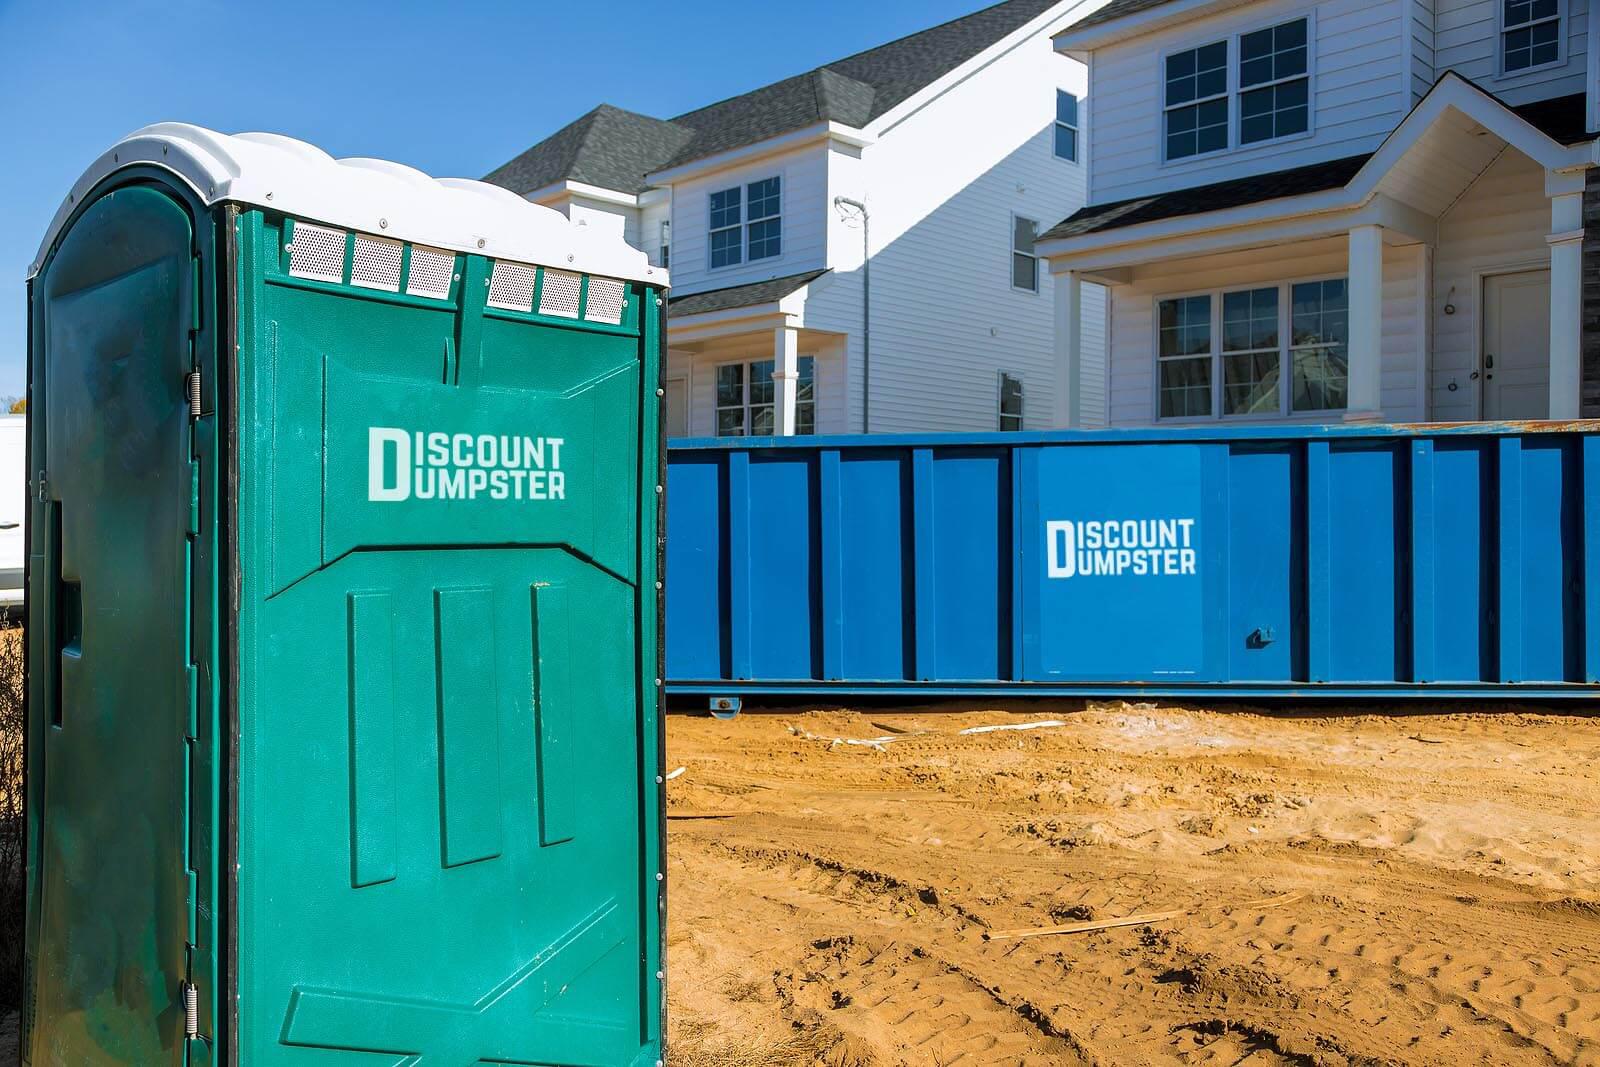 Discount dumpster has affordable dumpster rates in Denver co for home renovations